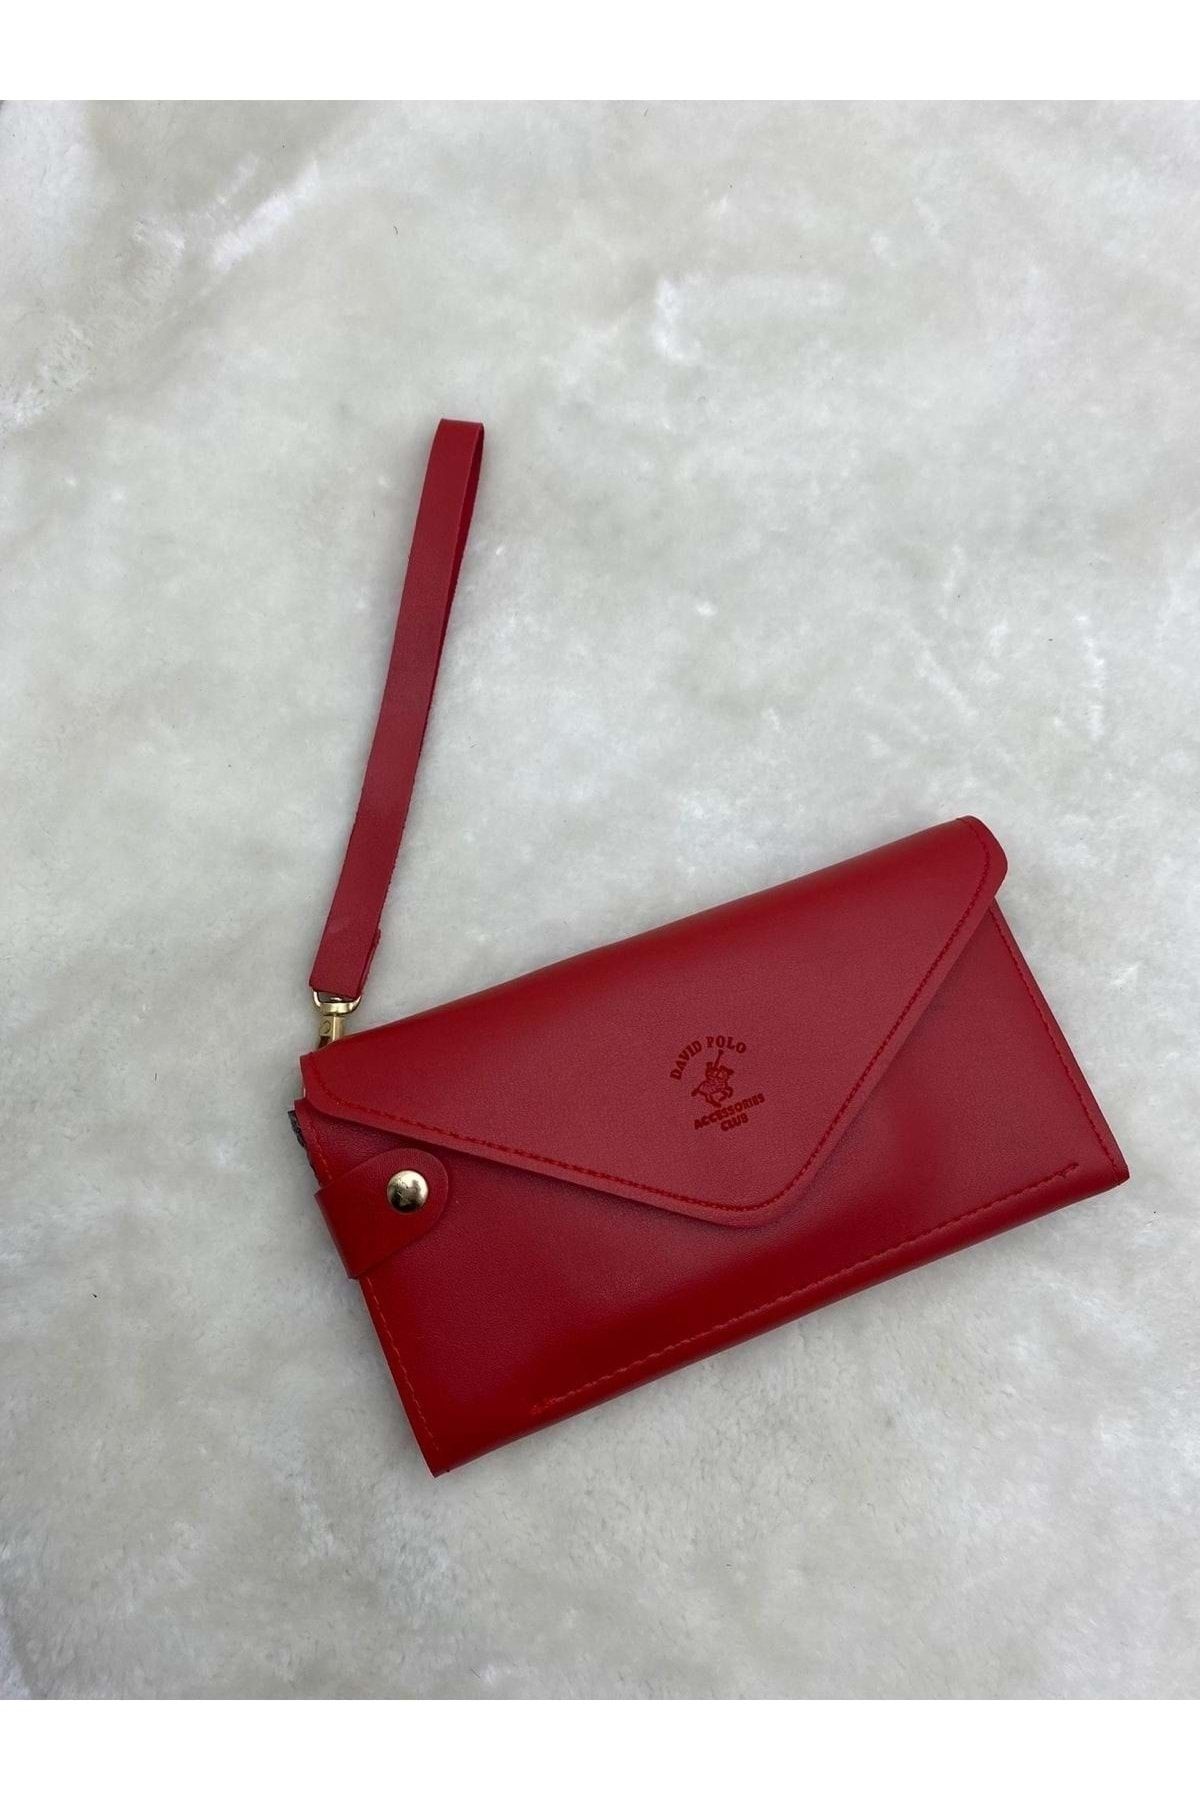 Louis Vuitton Envelope Pouch 2018 Chinese New Year Dog Red in